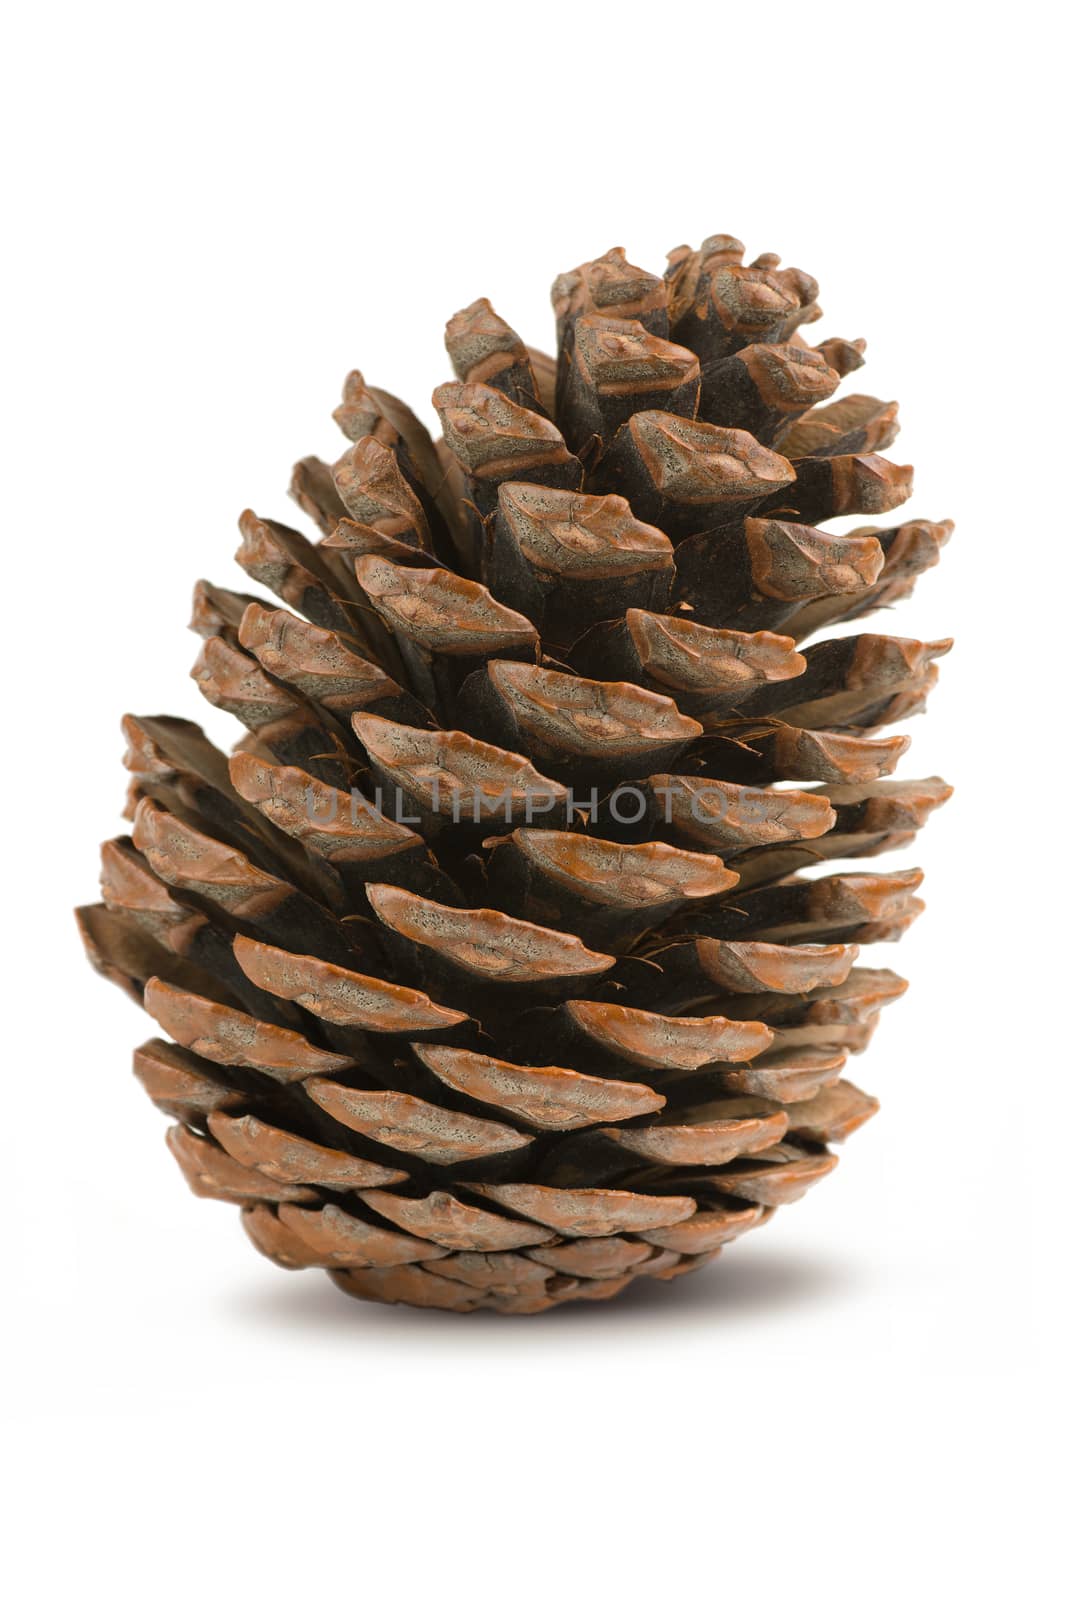 Conifer cone by Axelpic